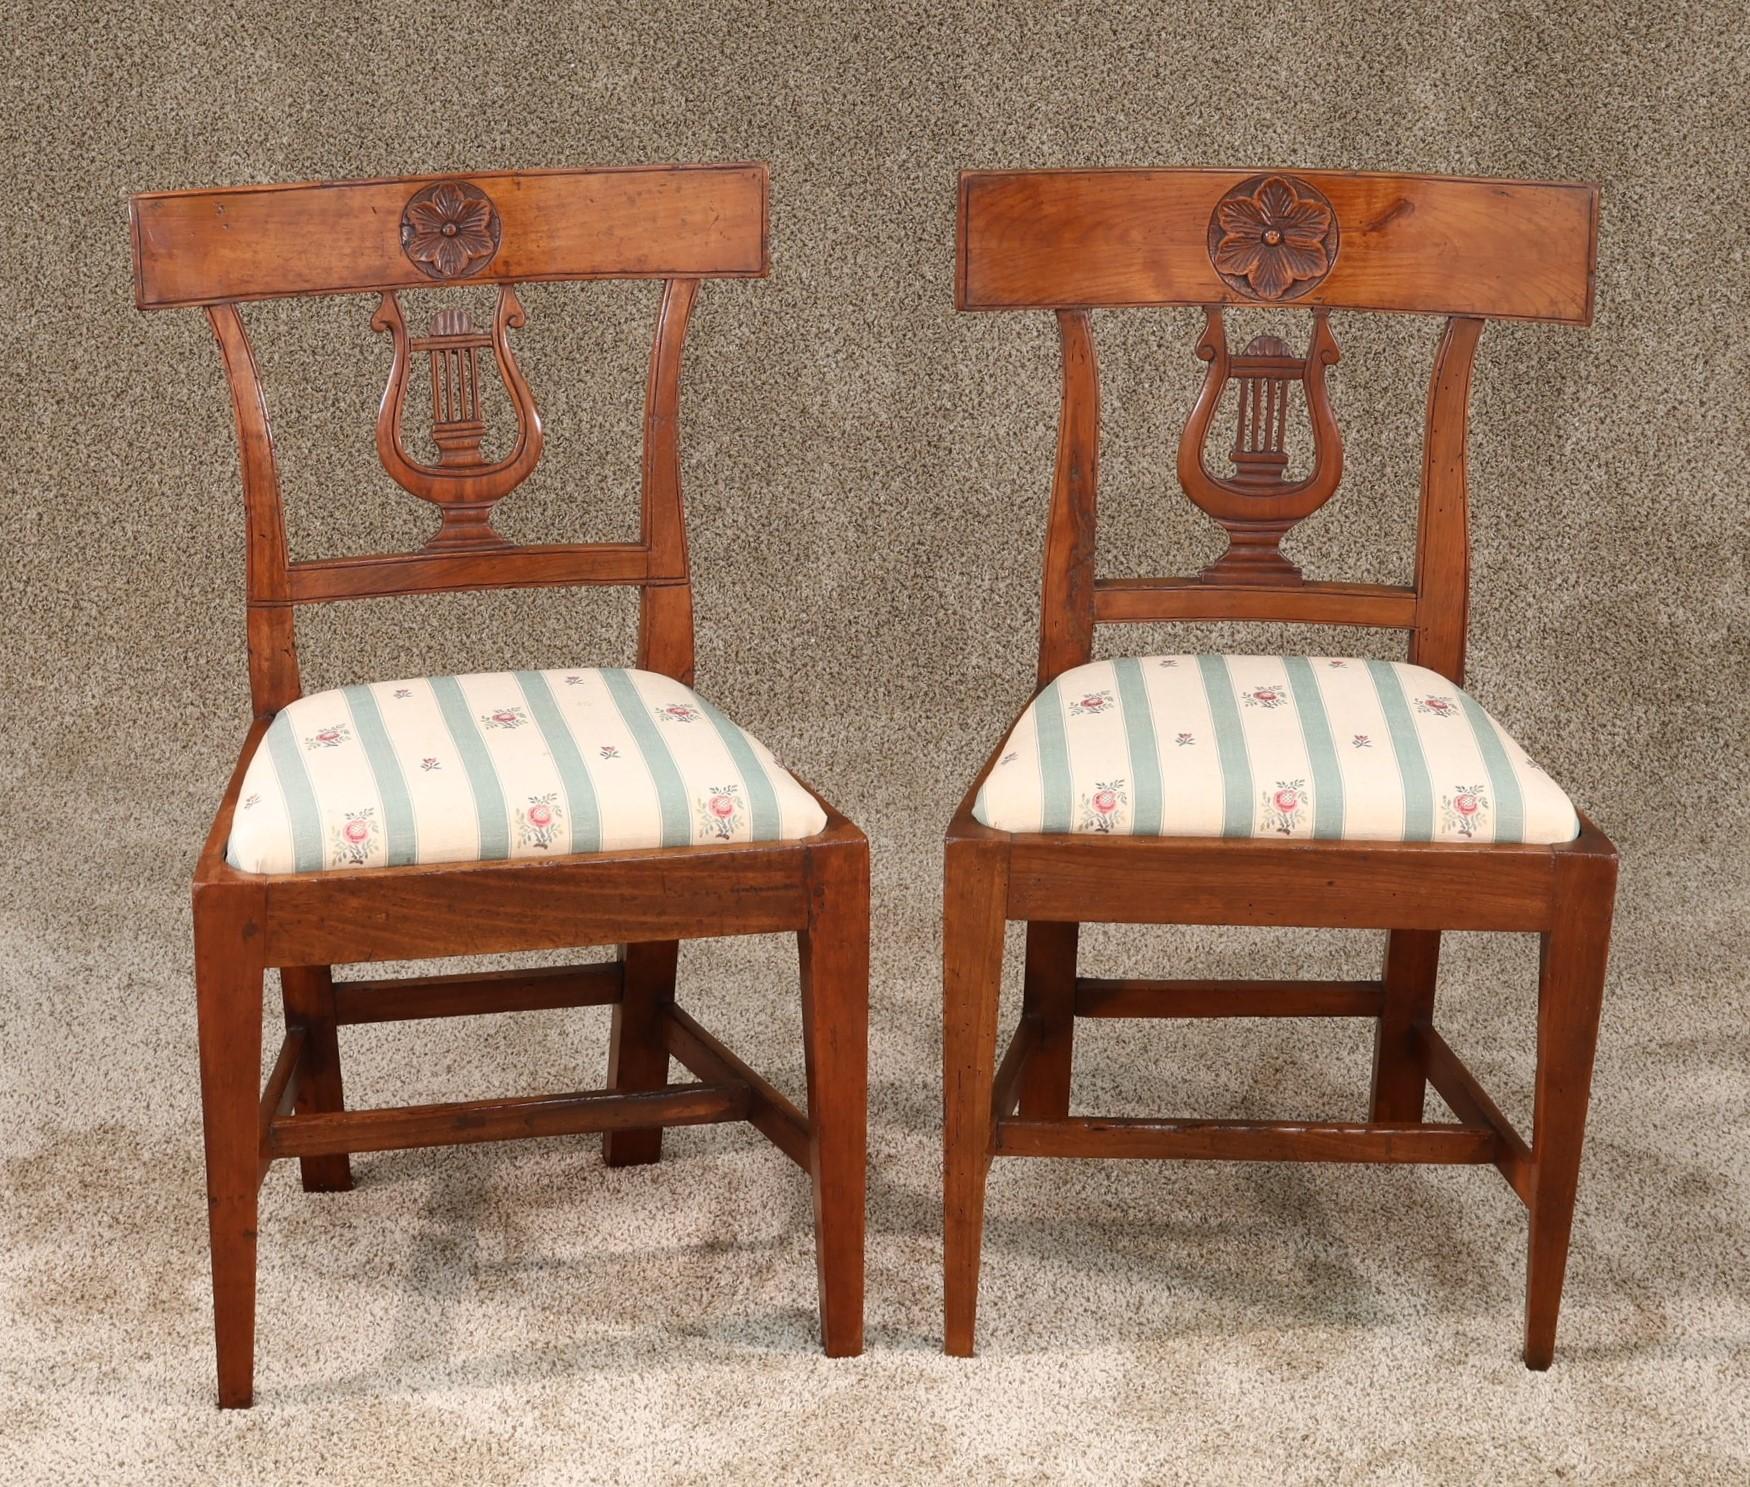 French Provincial Pair of Small Scale French Fruitwood Side Chairs with Carving, circa 1850 For Sale